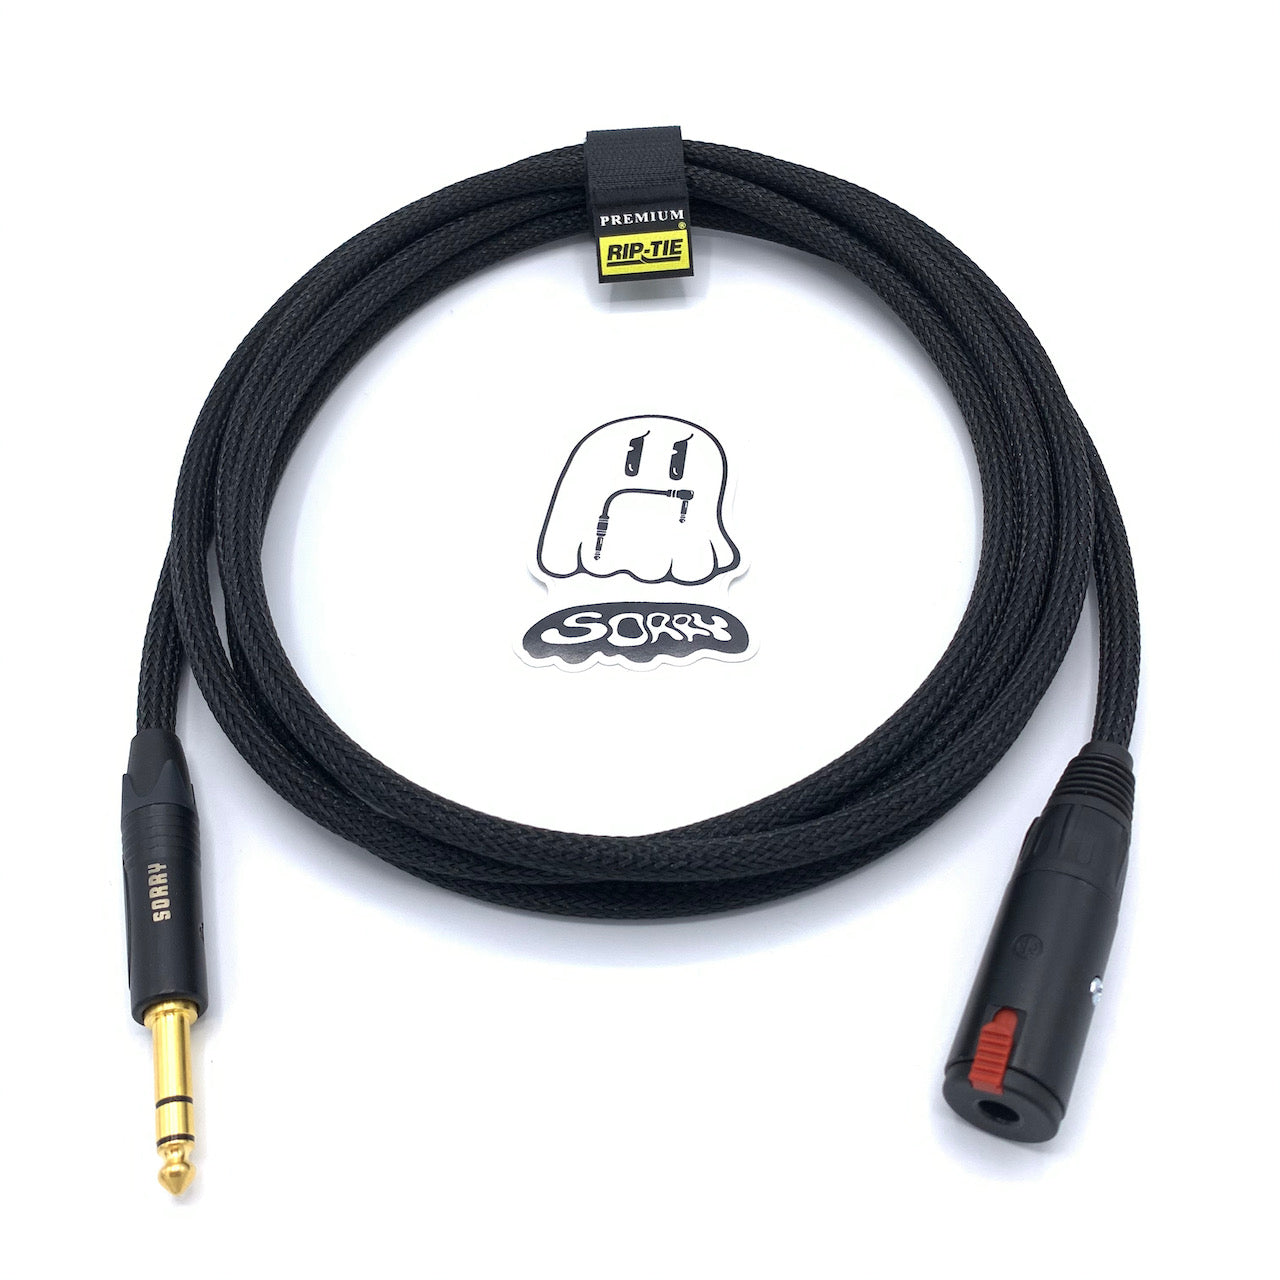 SORRY Locking Headphone Extension Cable - Extra Black